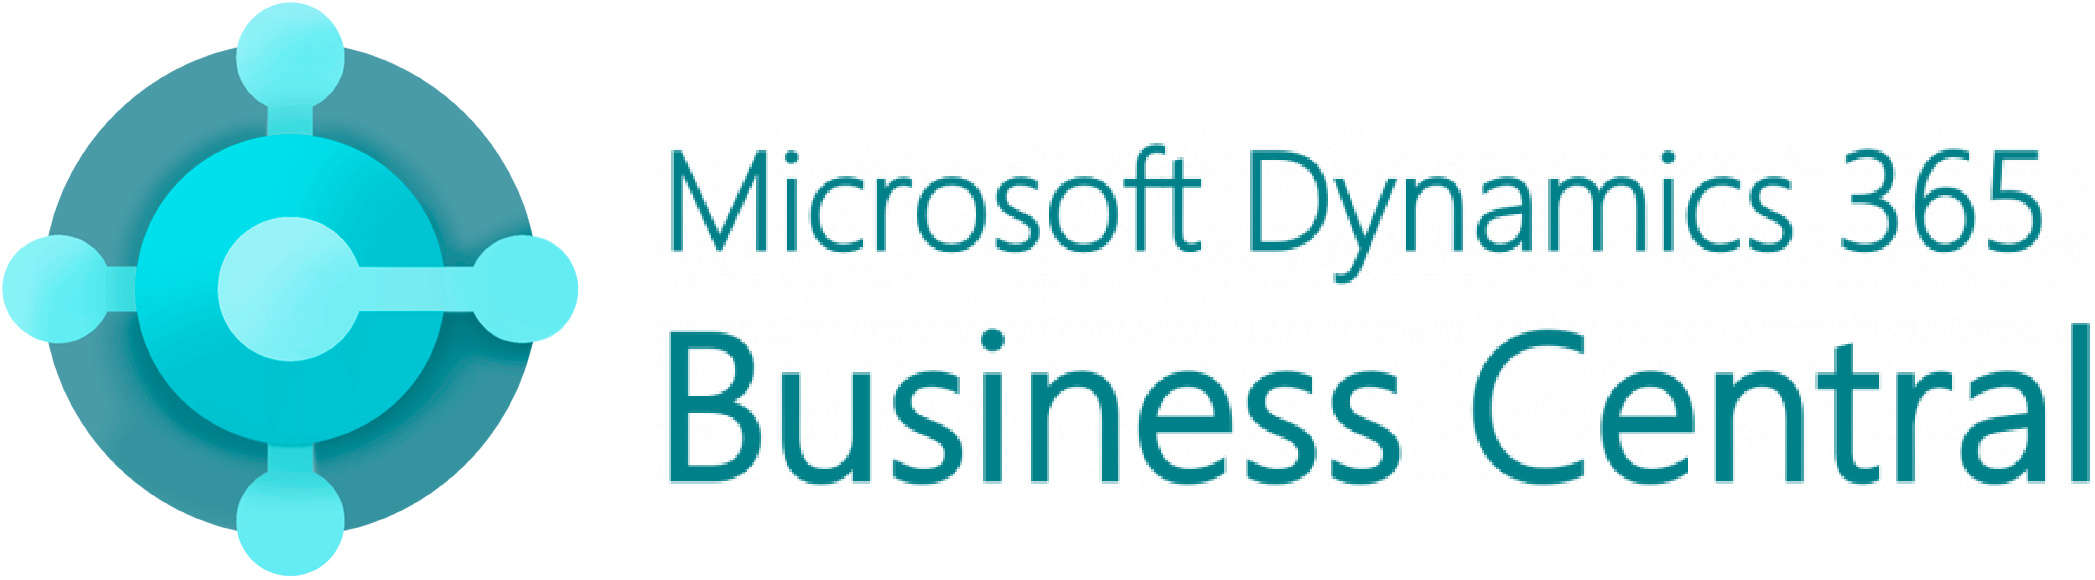 Zudello integrates with Microsoft Dynamics 365 Business Central